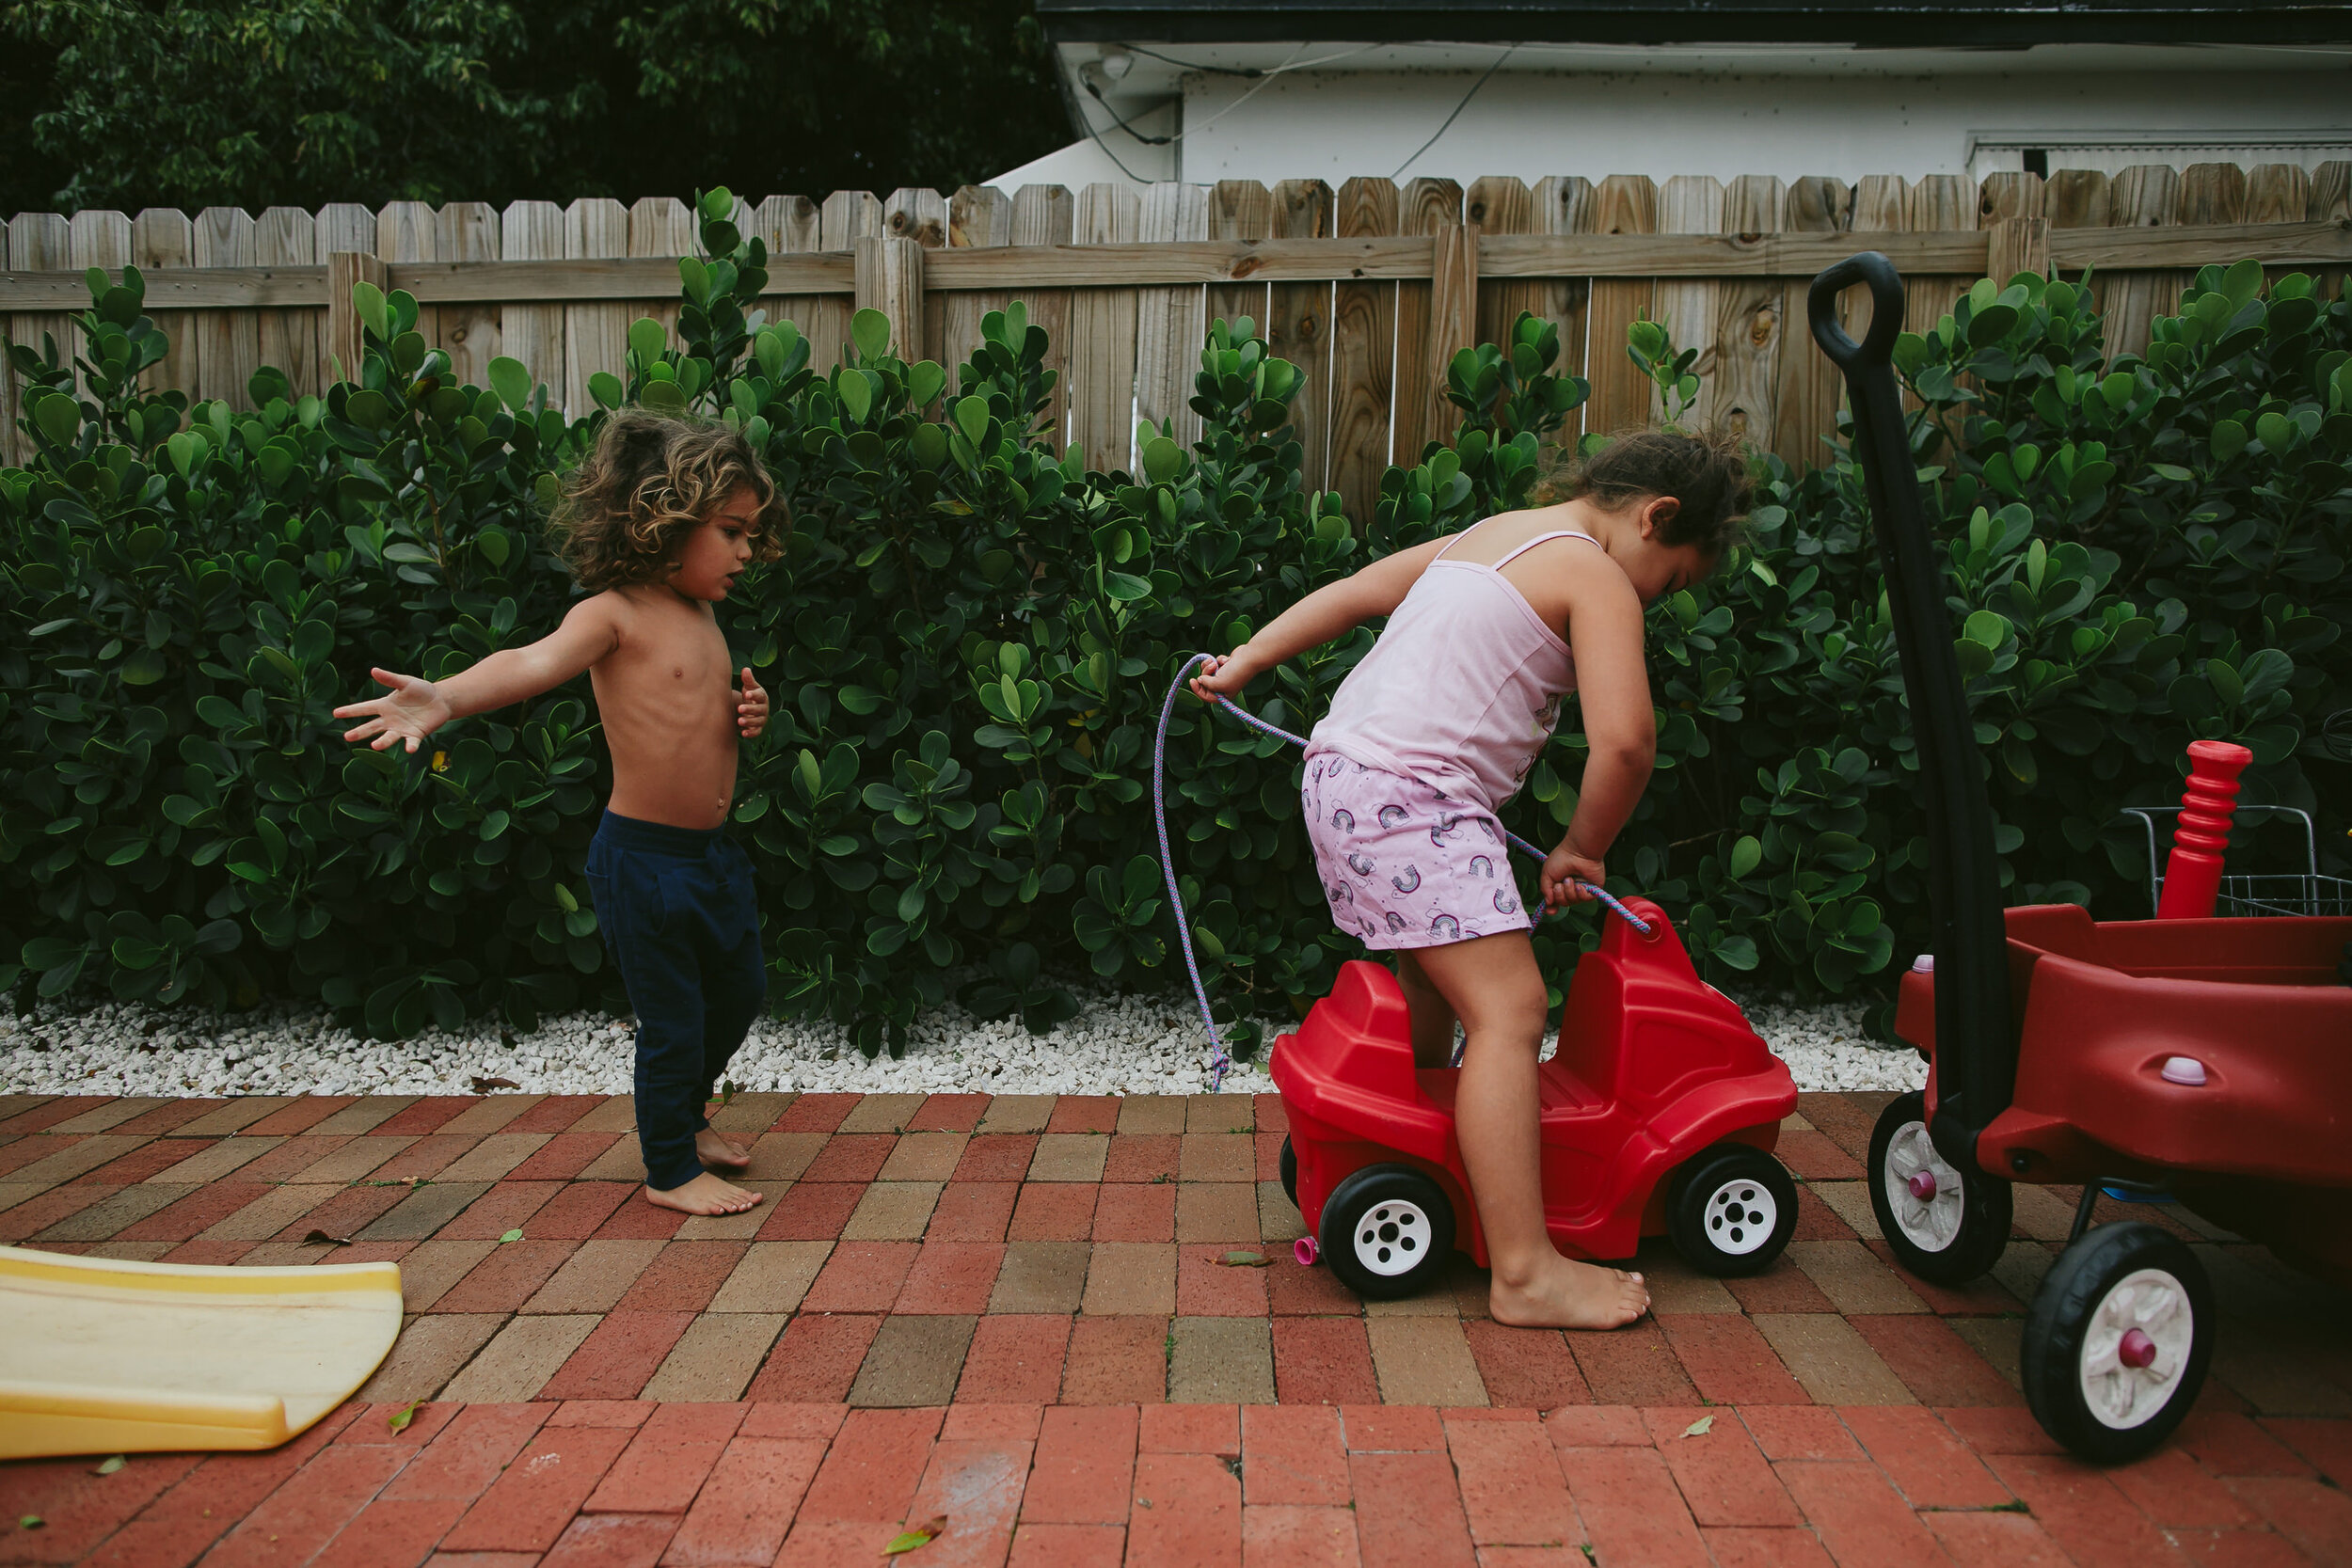 Siblings-Playing-Backyard-Florida-Family-Day-In-The-Life-Experience